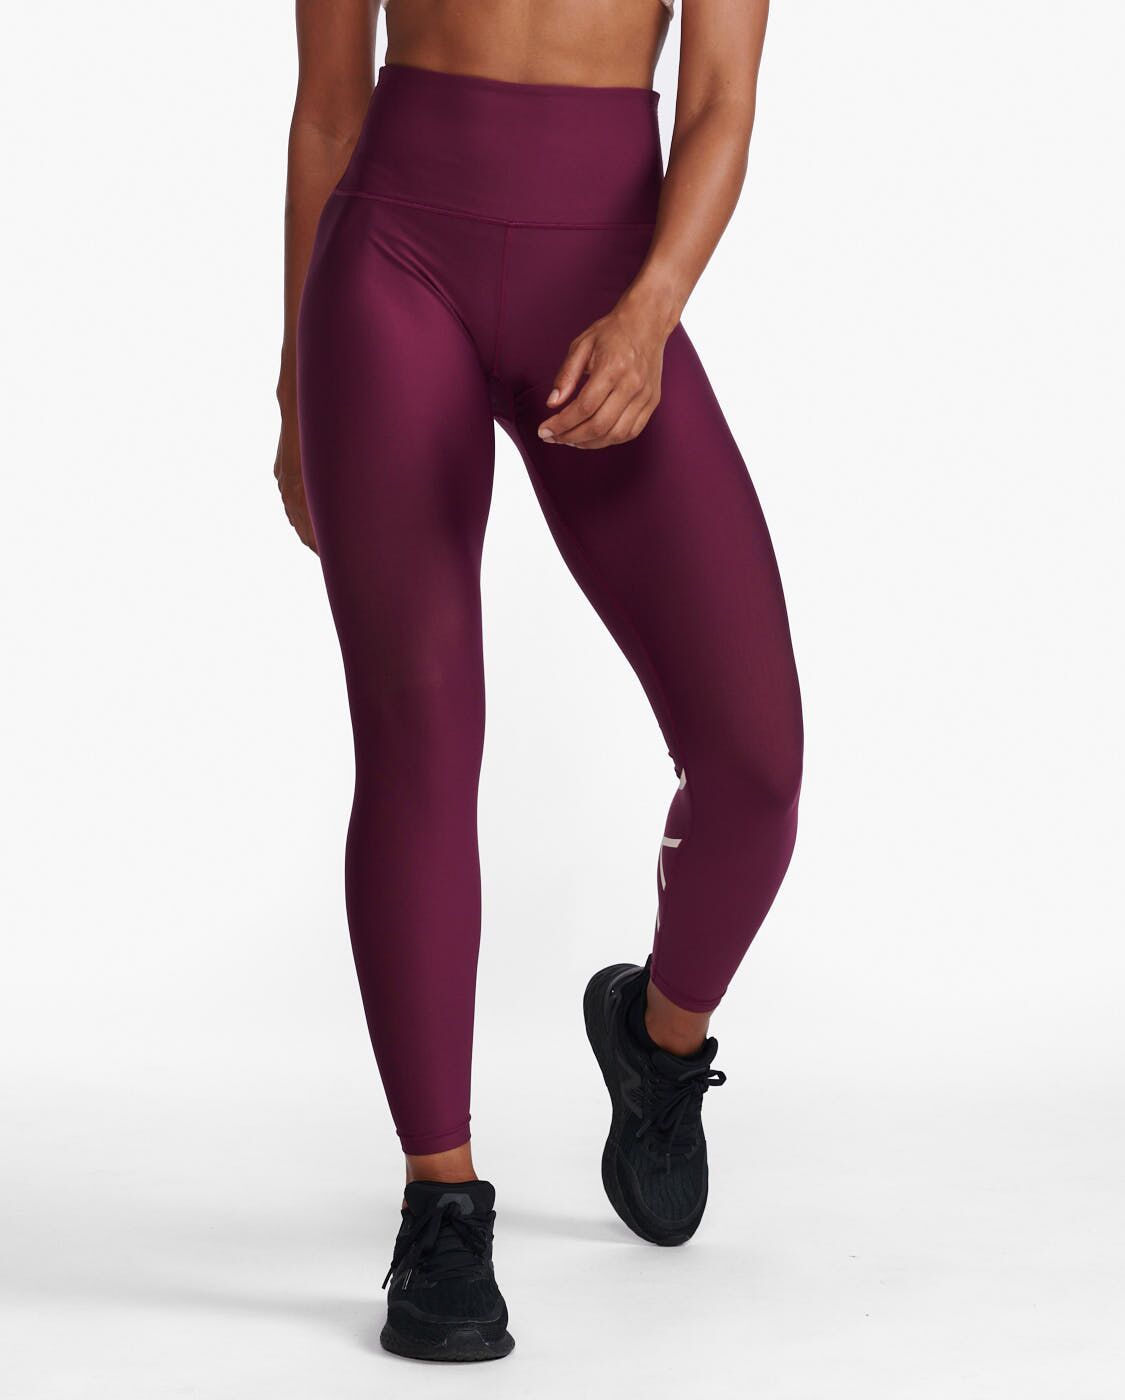 2XU South Africa - Womens Aero Sculpt Hi-Rise Compression Tights - Mulberry/Peach Whip Reflective